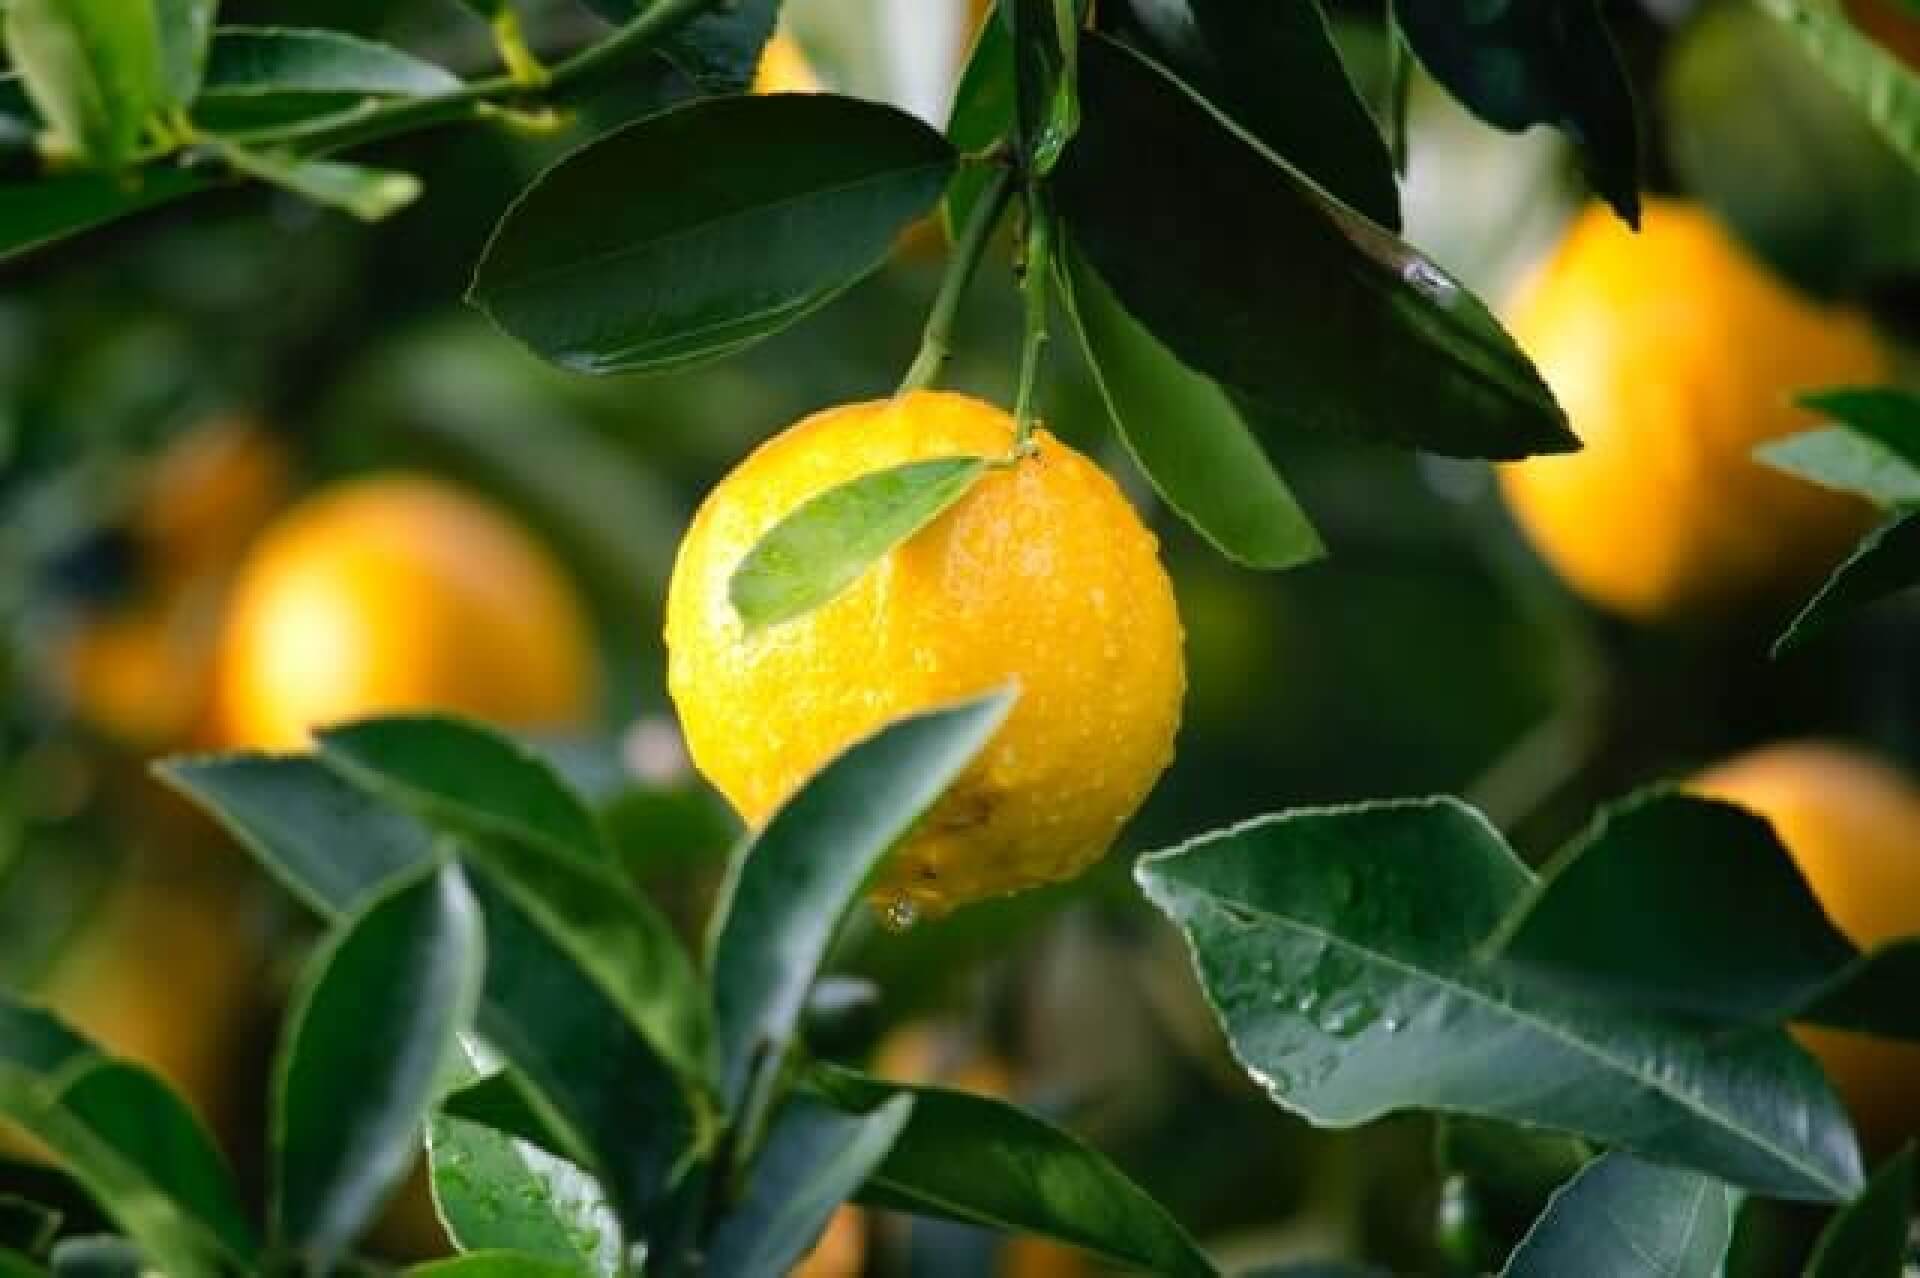 In this example, we create a JPG/JPG image that's three times larger than the original JPG/JPEG image of limes hiding in green leaves. To do this, we enter "300%" as the enlargement percentage. We also turn off the smoothness option to get crisp pixels in the upgraded JPG/JPEG. (Source: Pexels.)